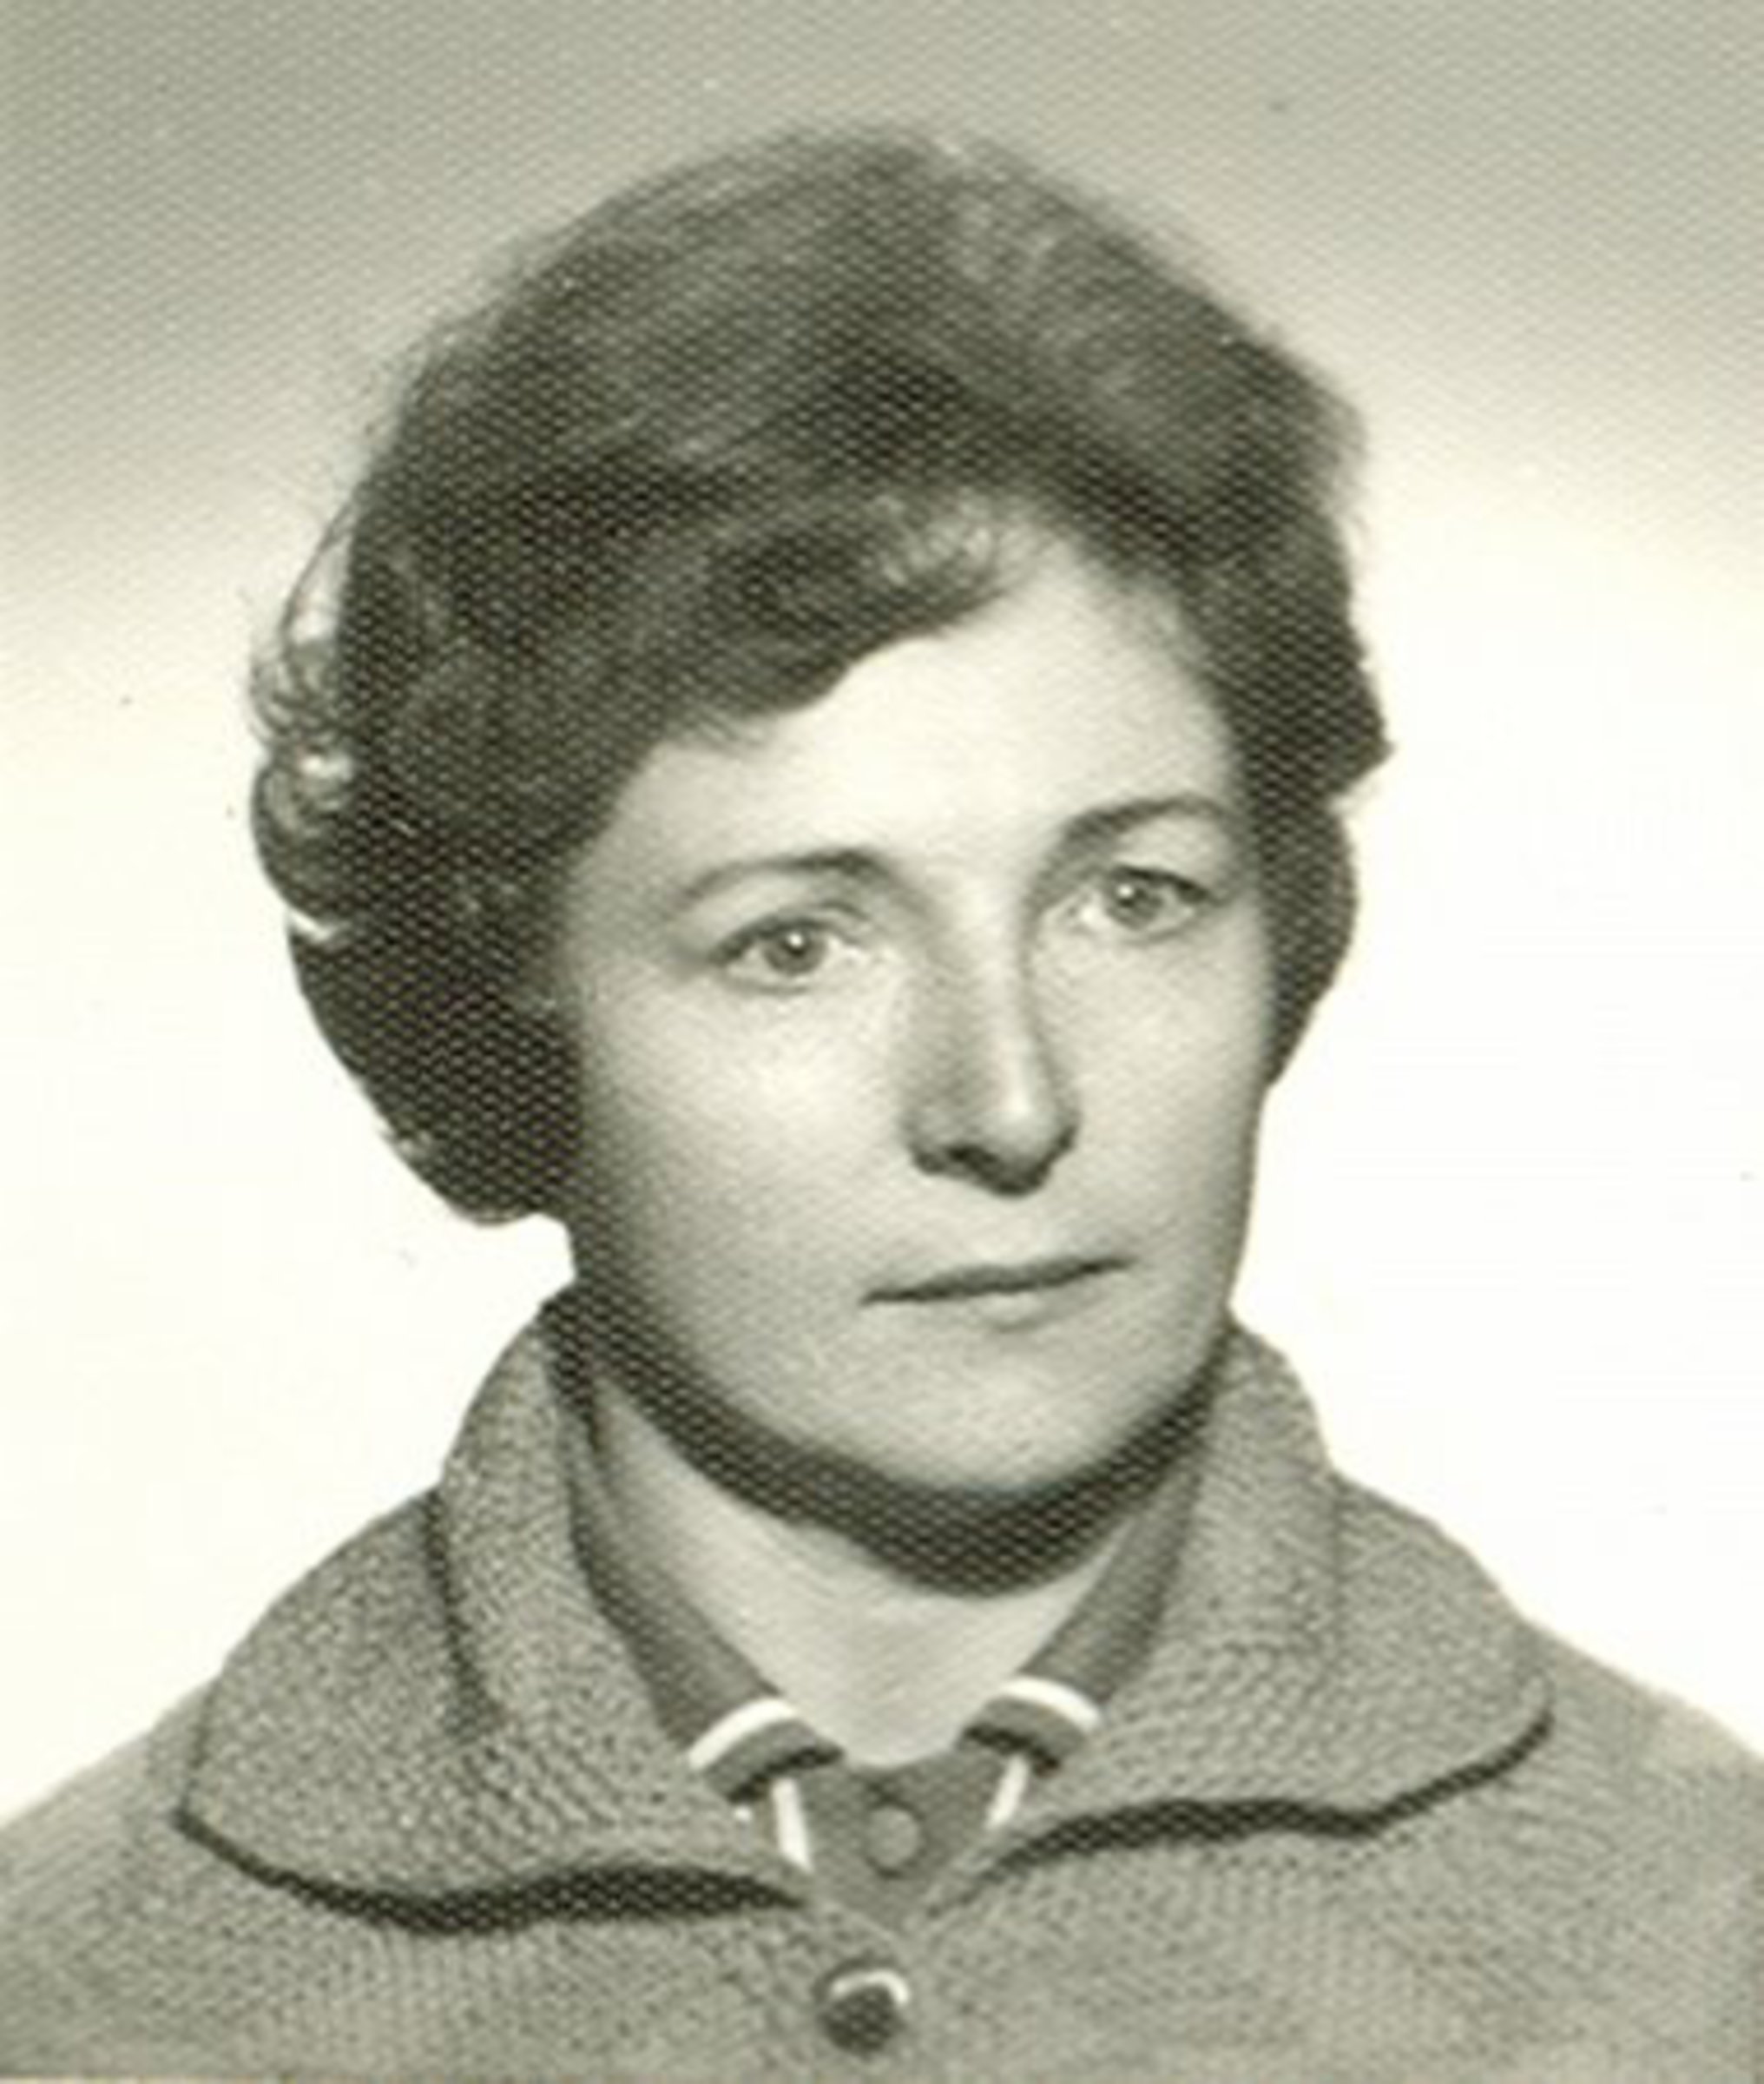 As a young woman, c. 1947